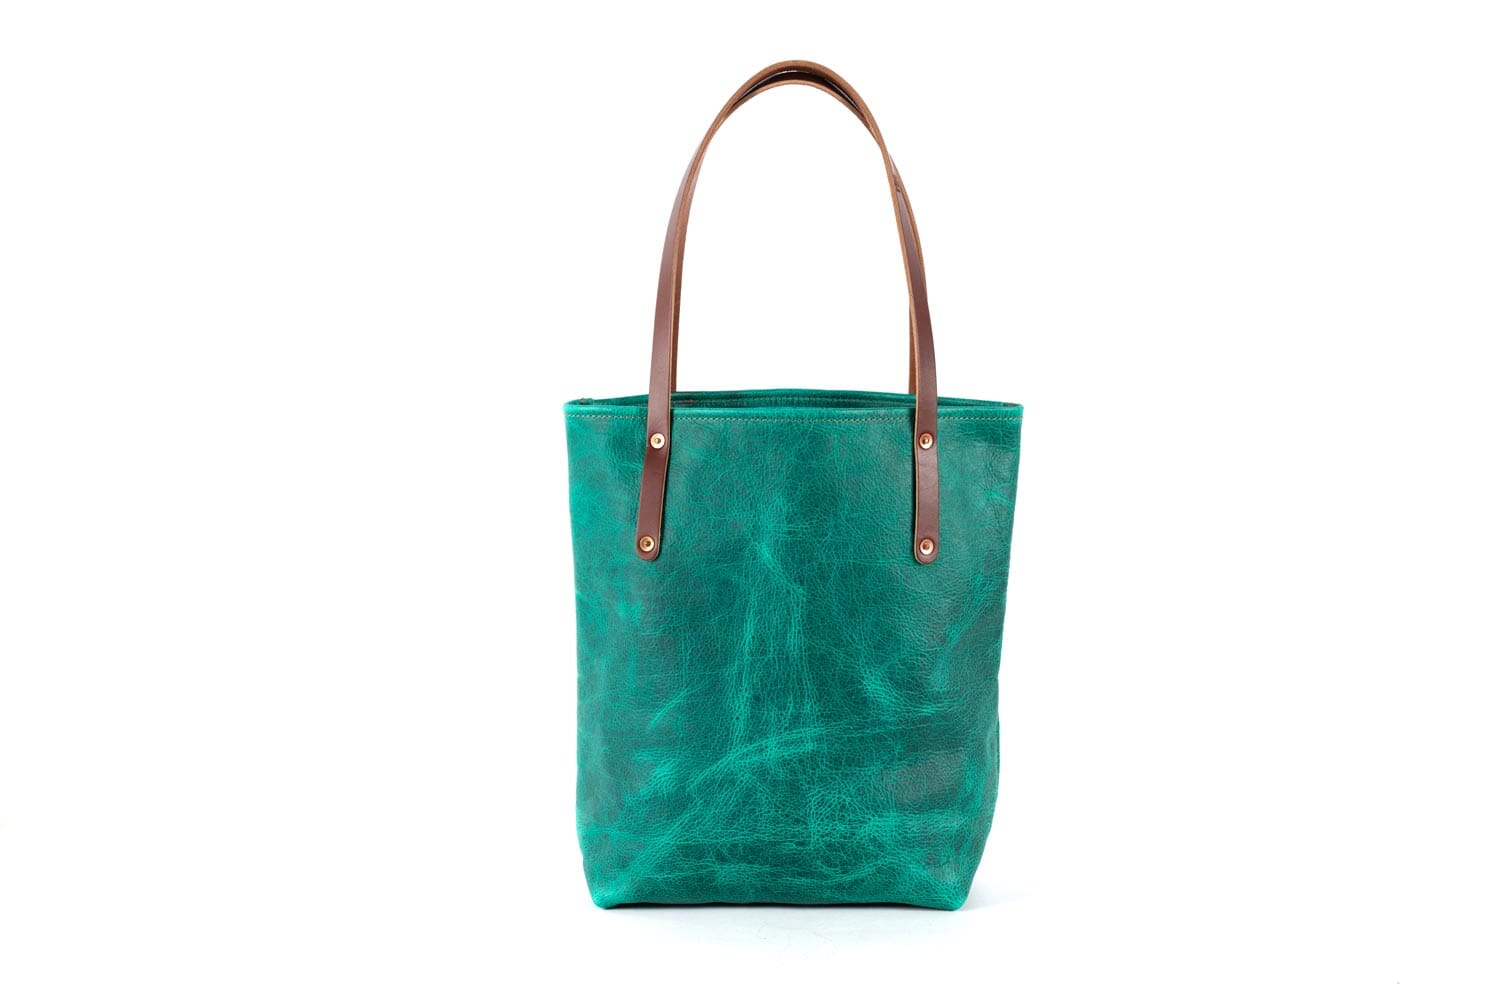 AVERY LEATHER TOTE BAG - SLIM LARGE - PINE GREEN BISON